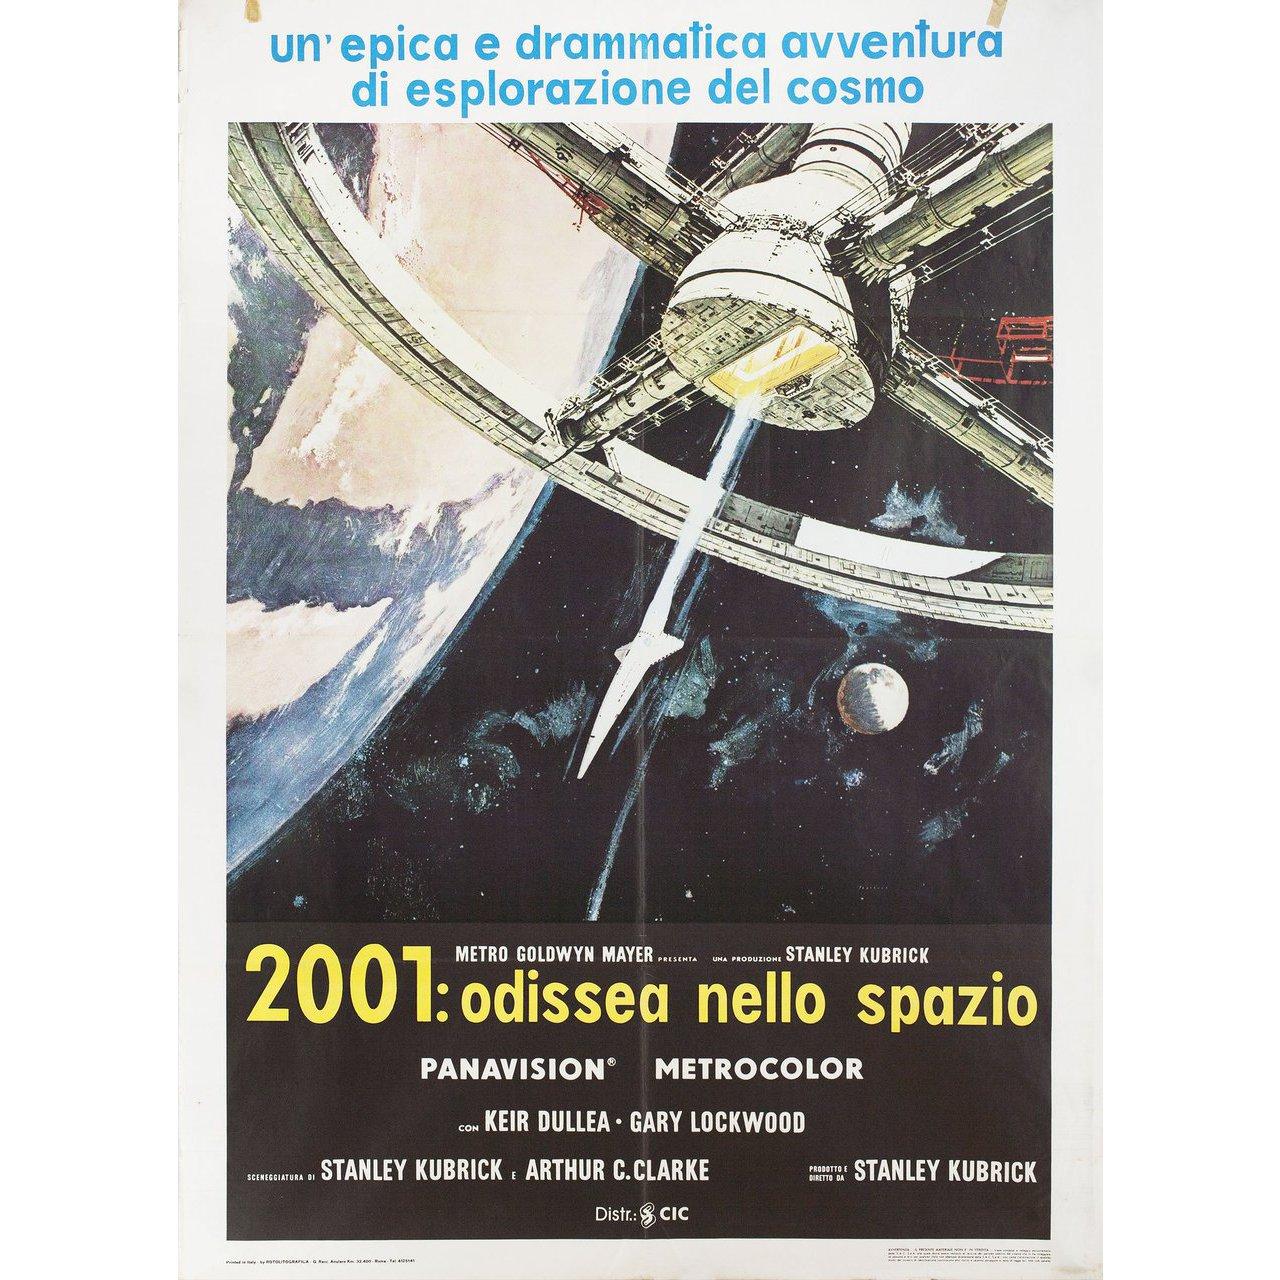 Original 1970s re-release Italian due fogli poster for the film '2001: A Space Odyssey' directed by Stanley Kubrick with Keir Dullea / Gary Lockwood / William Sylvester / Daniel Richter. Very good-fine condition, folded. Many original posters were